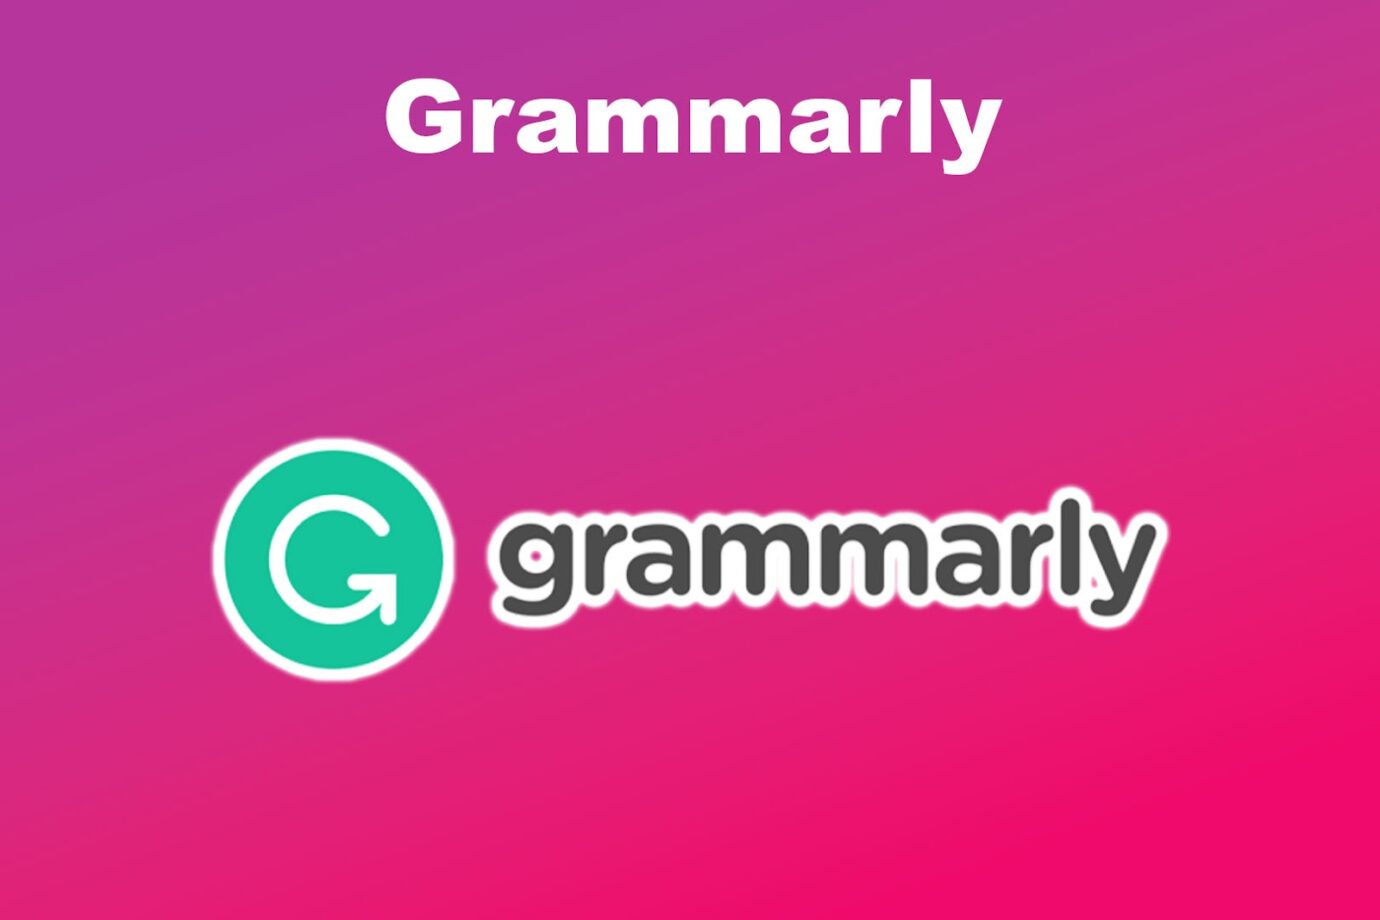 Outsourcing Word Processing Software - Grammarly